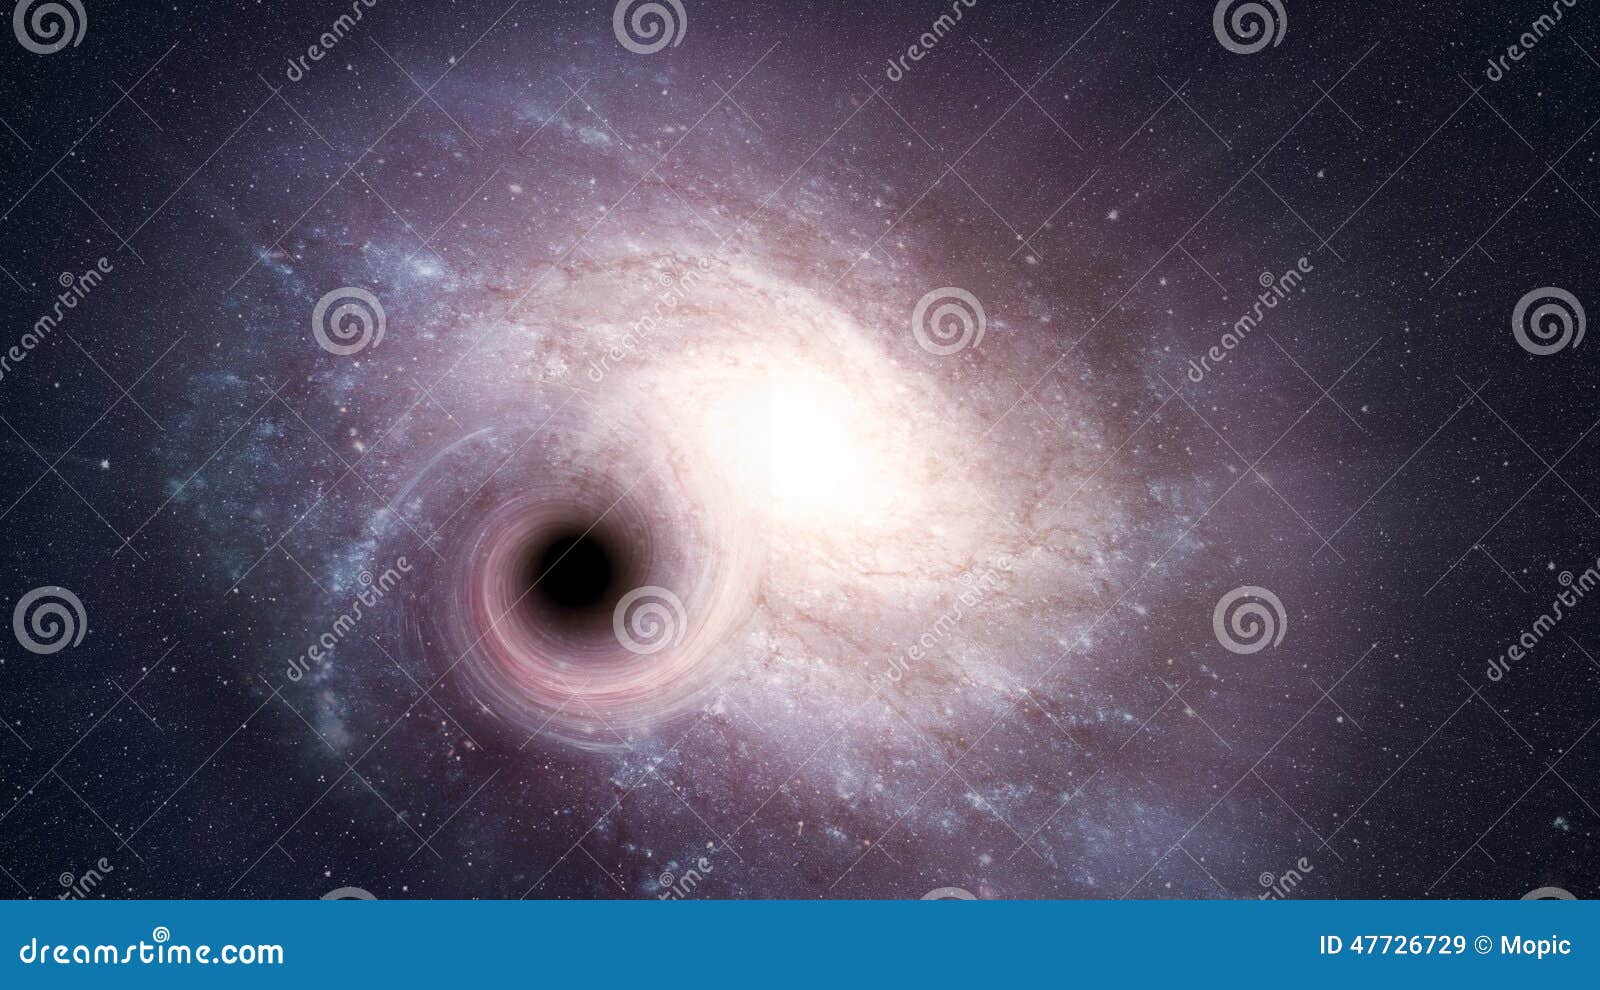 spiral galaxy and a black hole